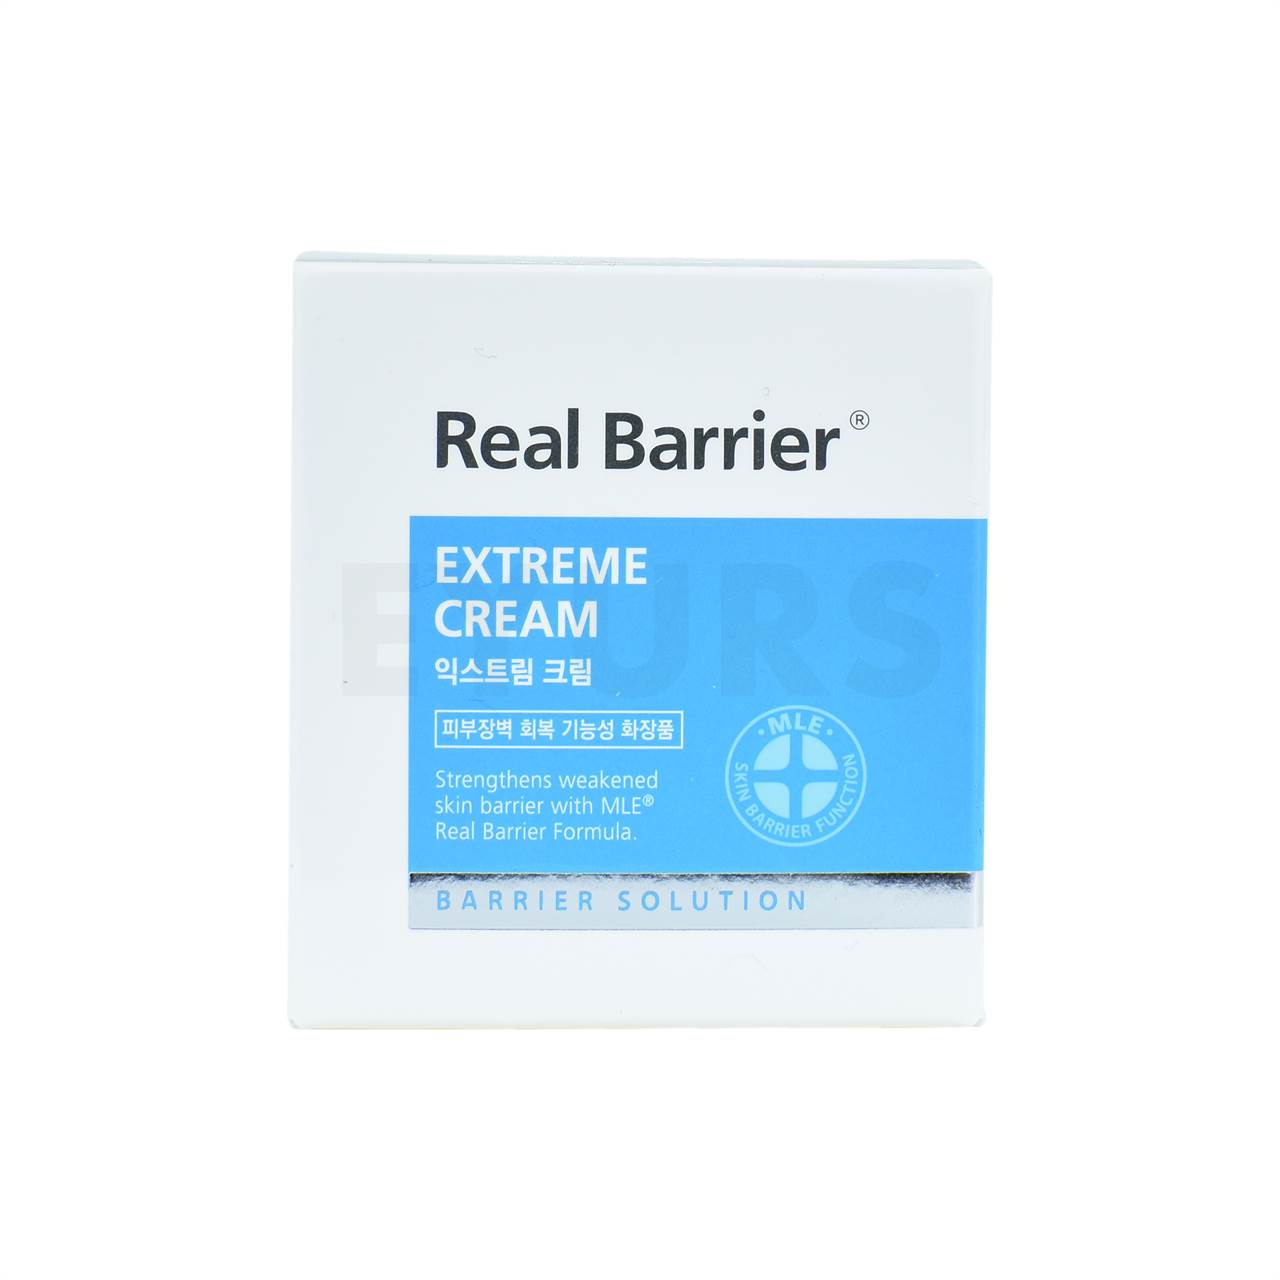 real barrier extreme cream 50ml front side packaging